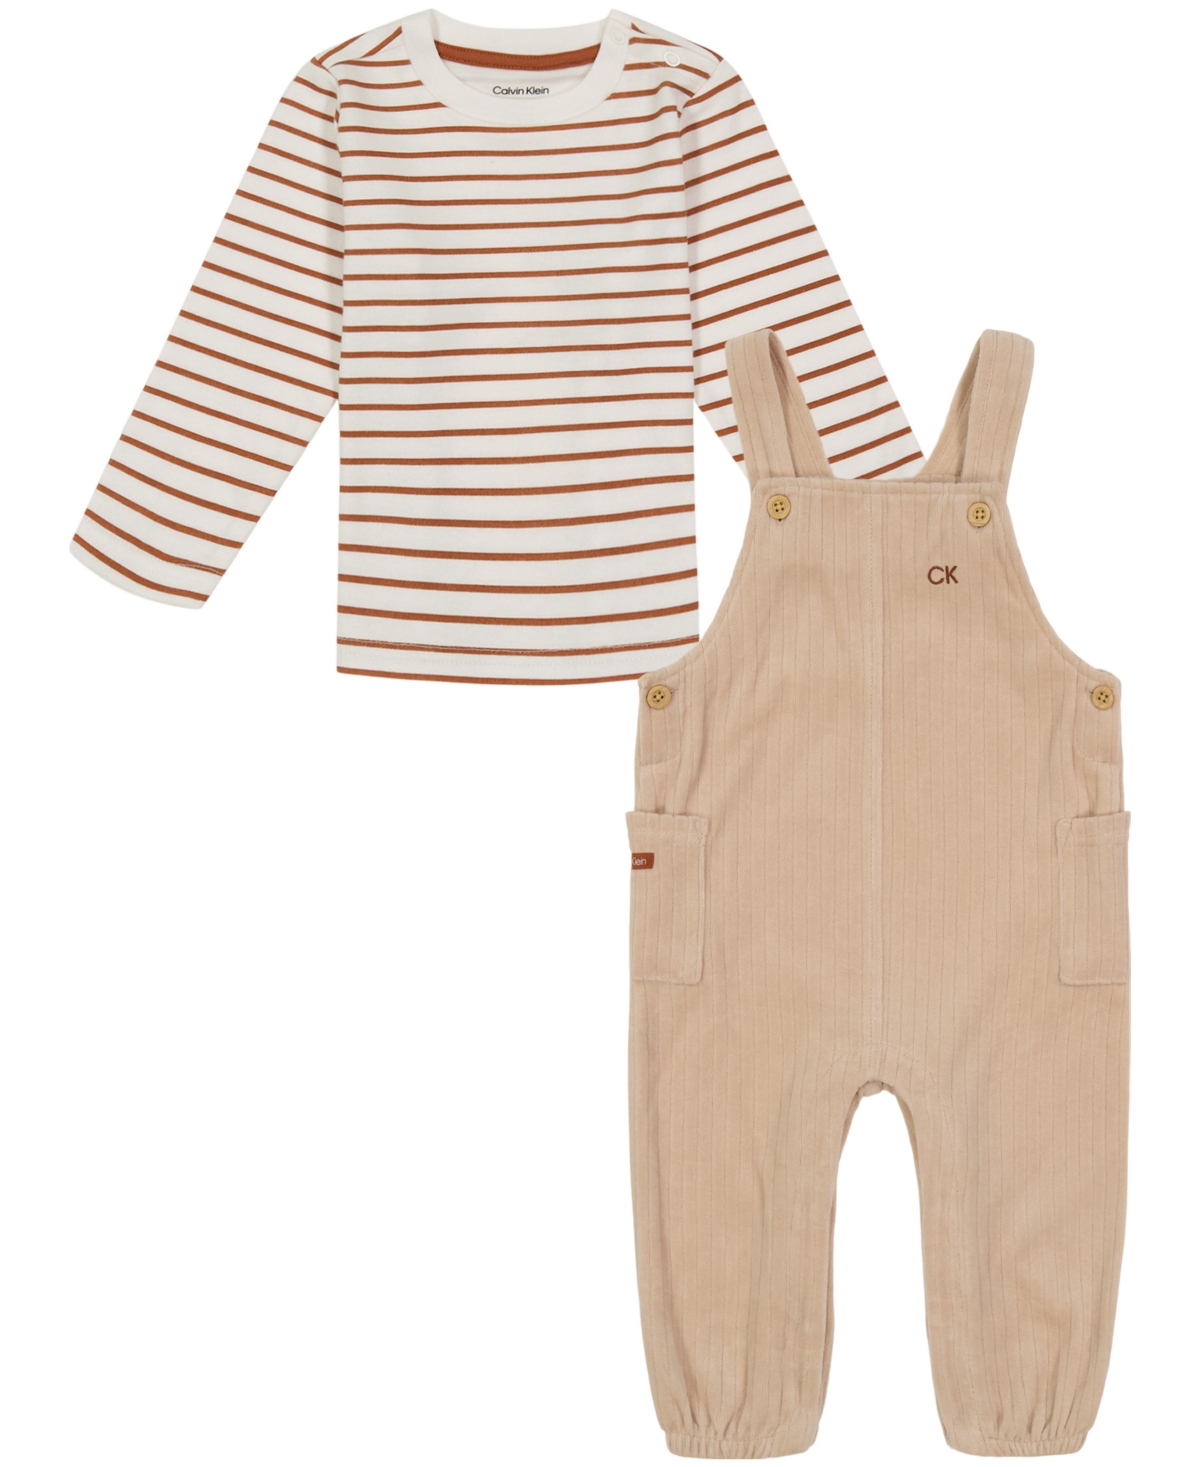 Calvin Klein Baby Boys 2 Piece Striped T-shirt And Ribbed Velour Overall Set In Tan